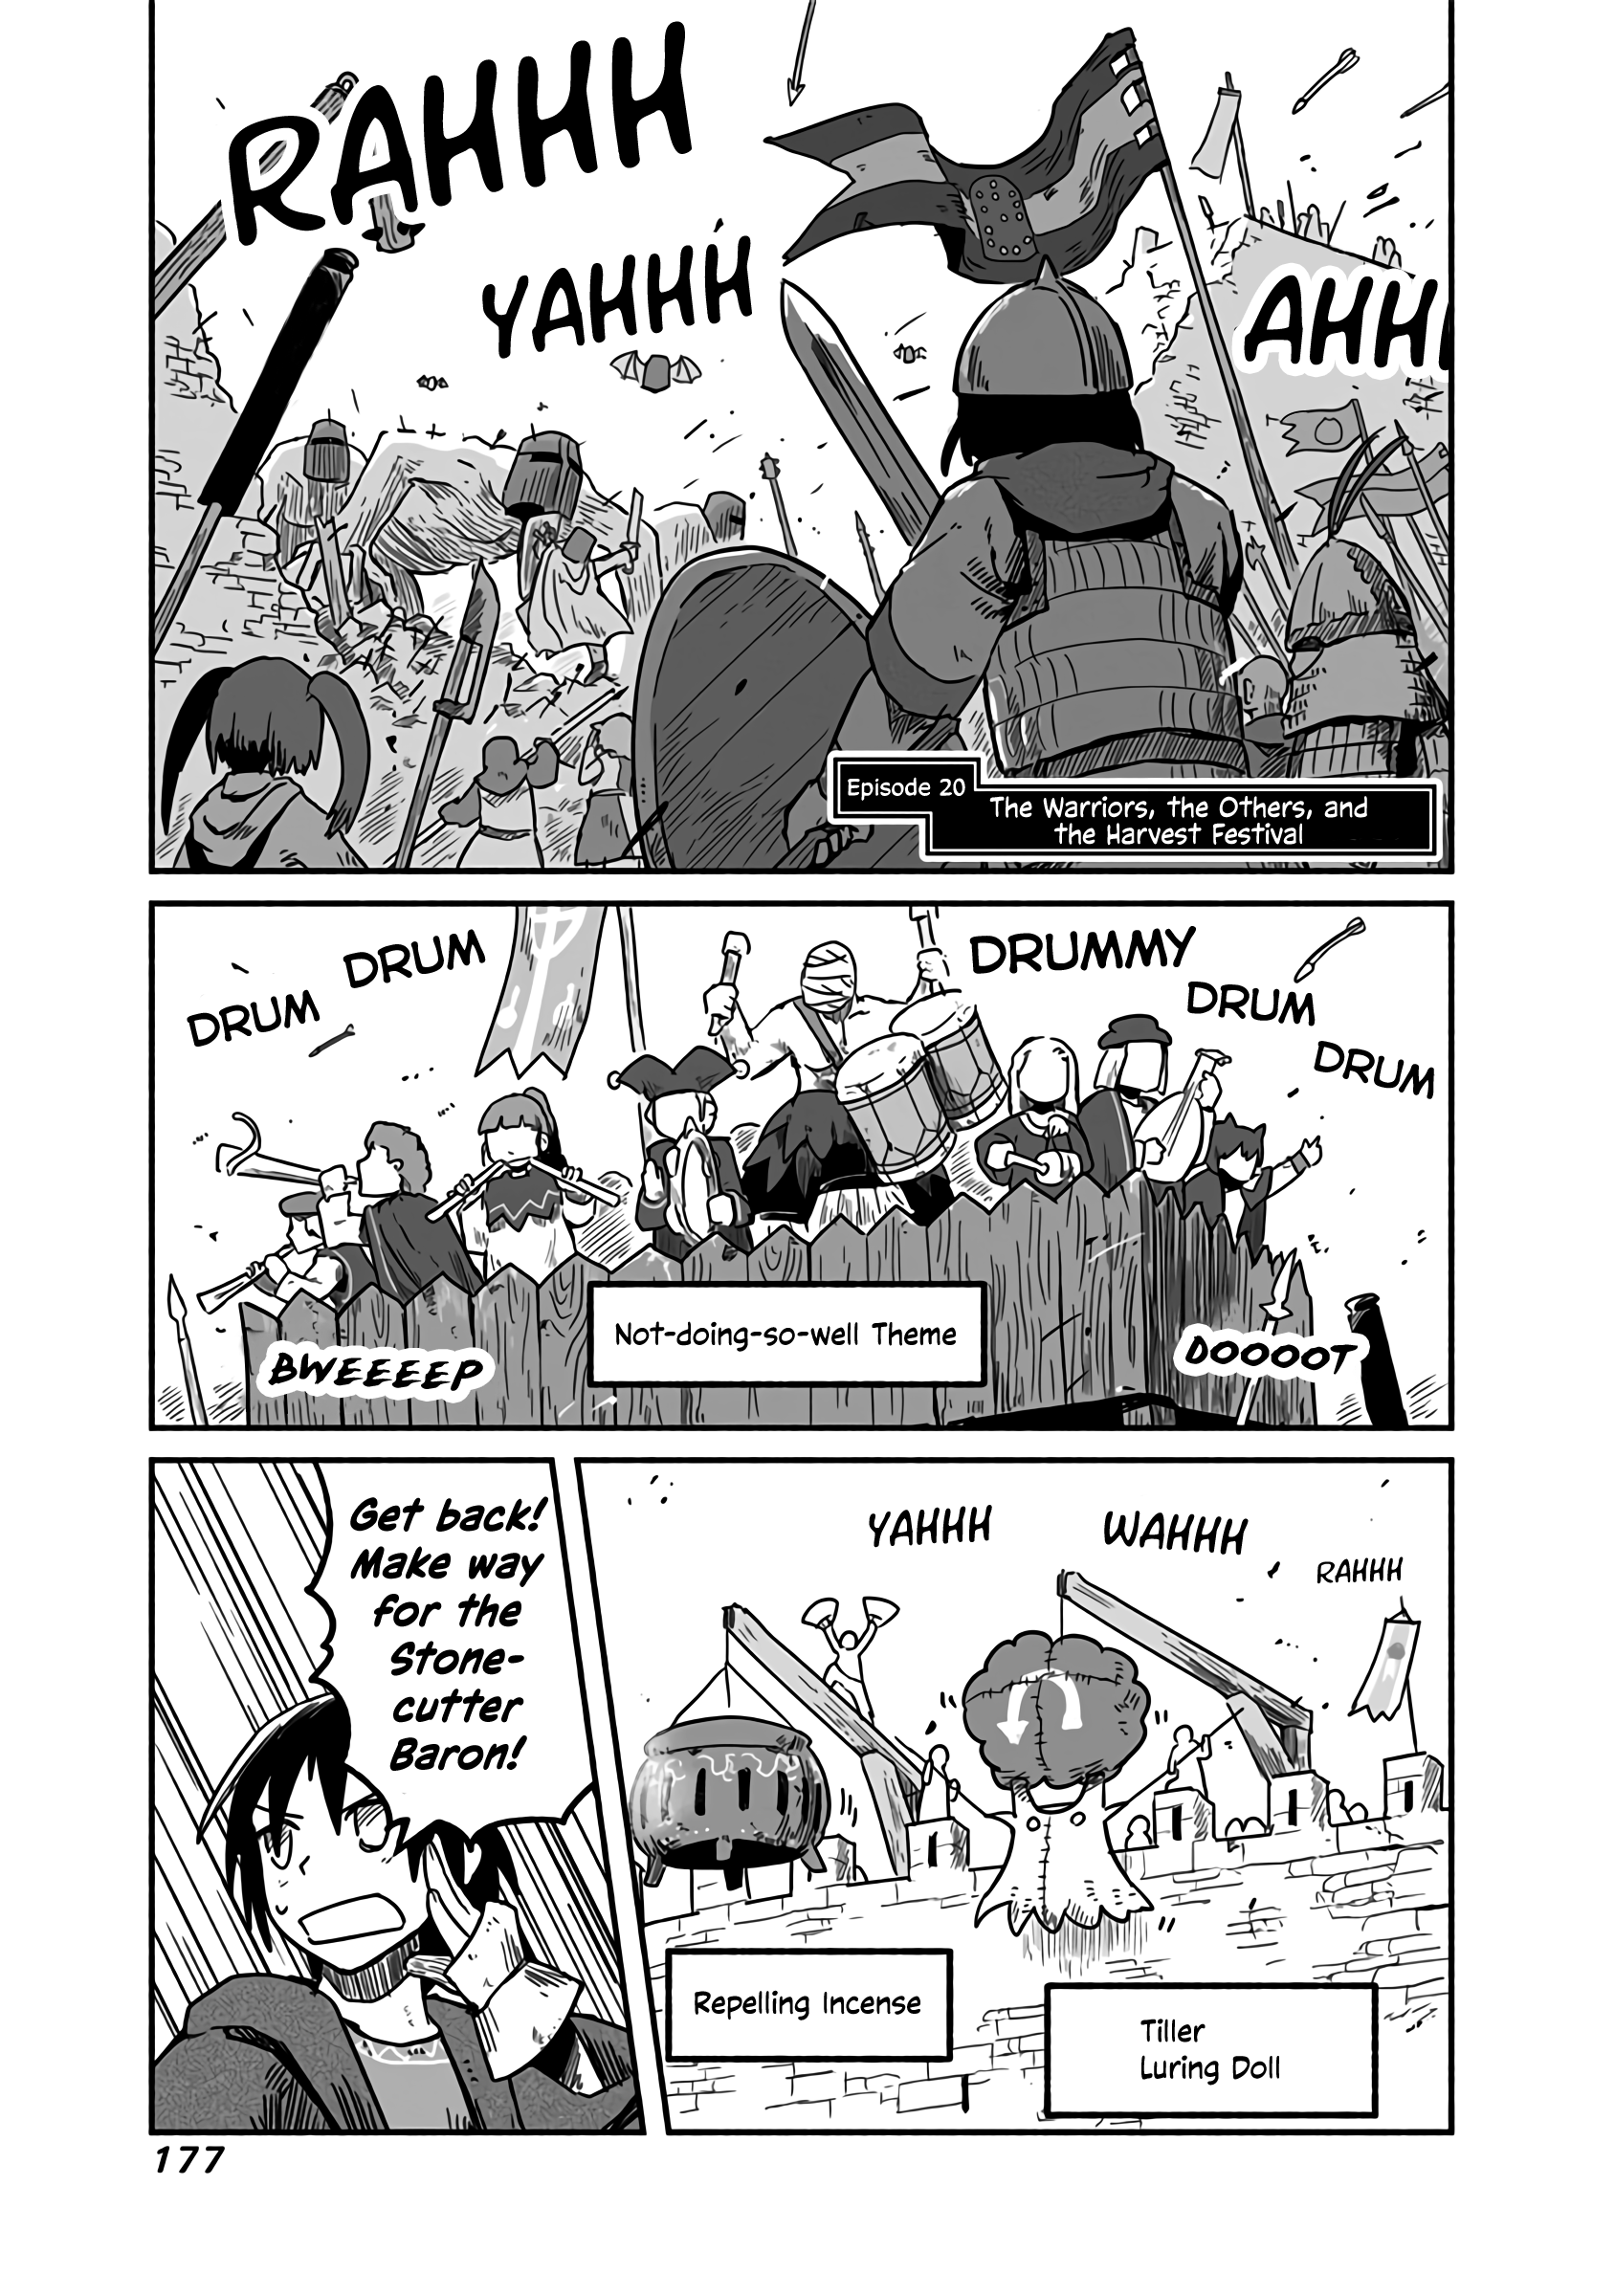 The Dragon, The Hero, And The Courier Vol.3 Chapter 20: The Warriors, The Others, And The Harvest Festival - Picture 2